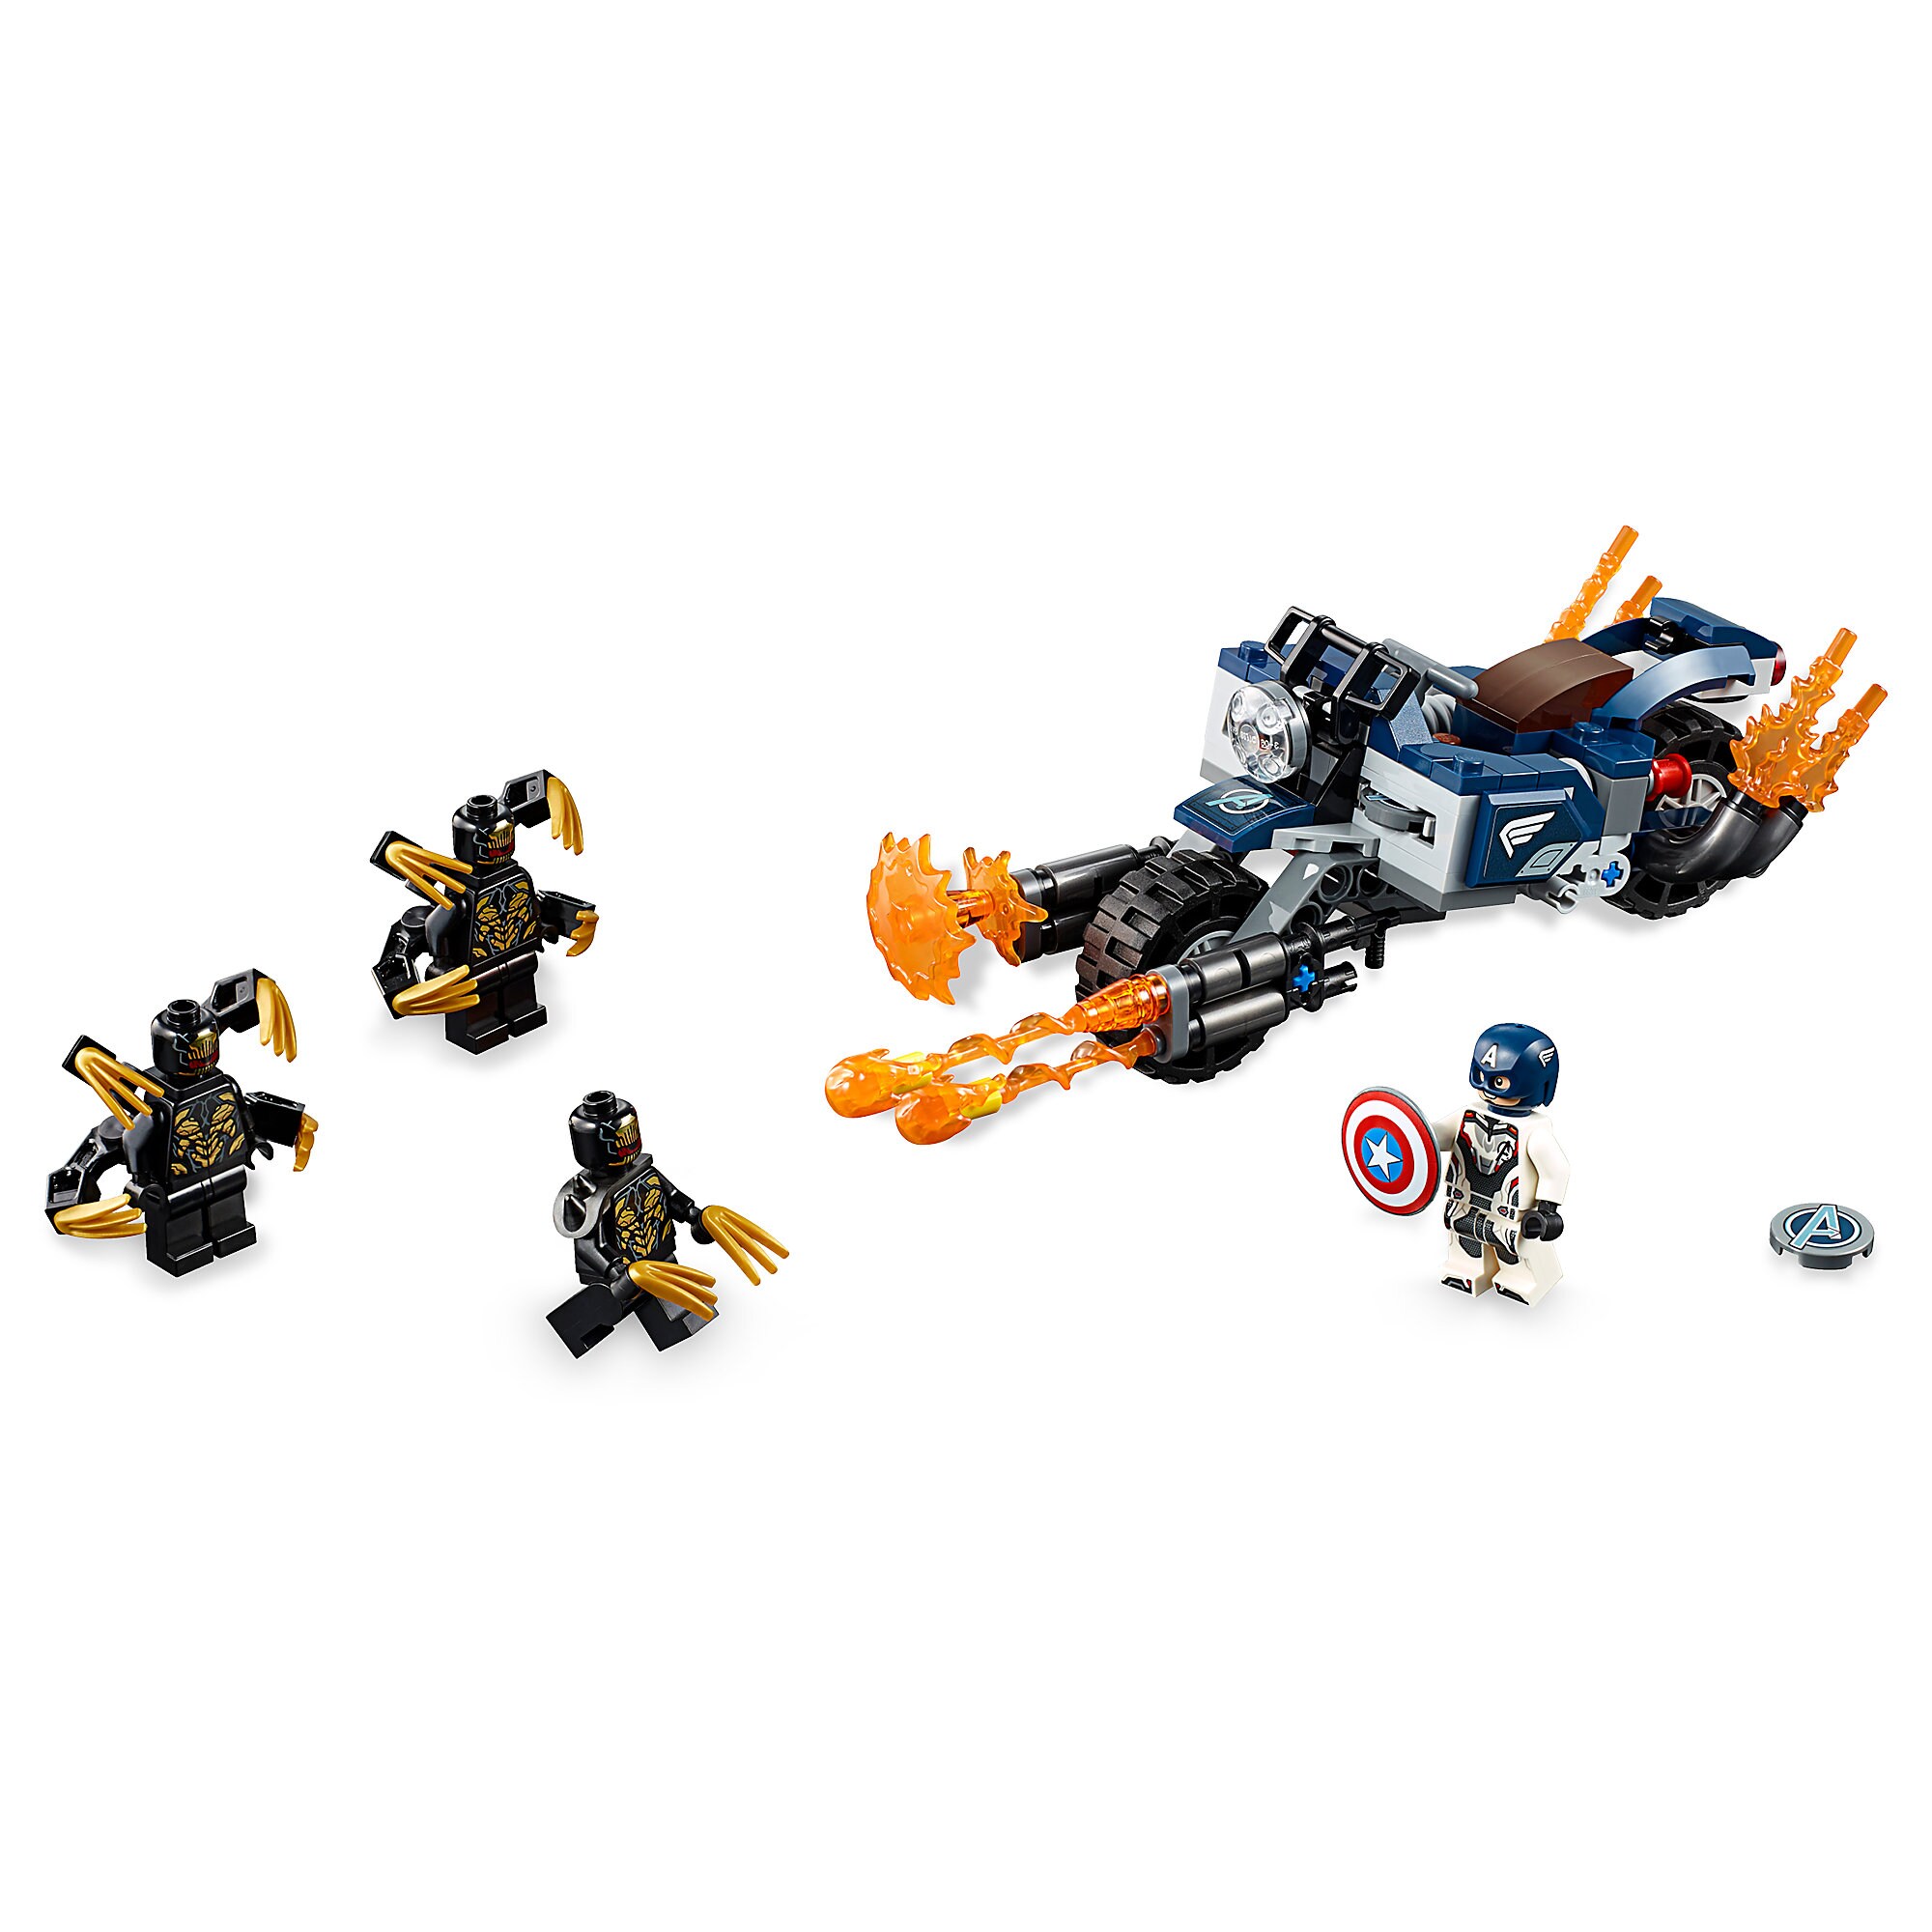 Captain America Outriders Attack Play Set by LEGO - Marvel's Avengers: Endgame